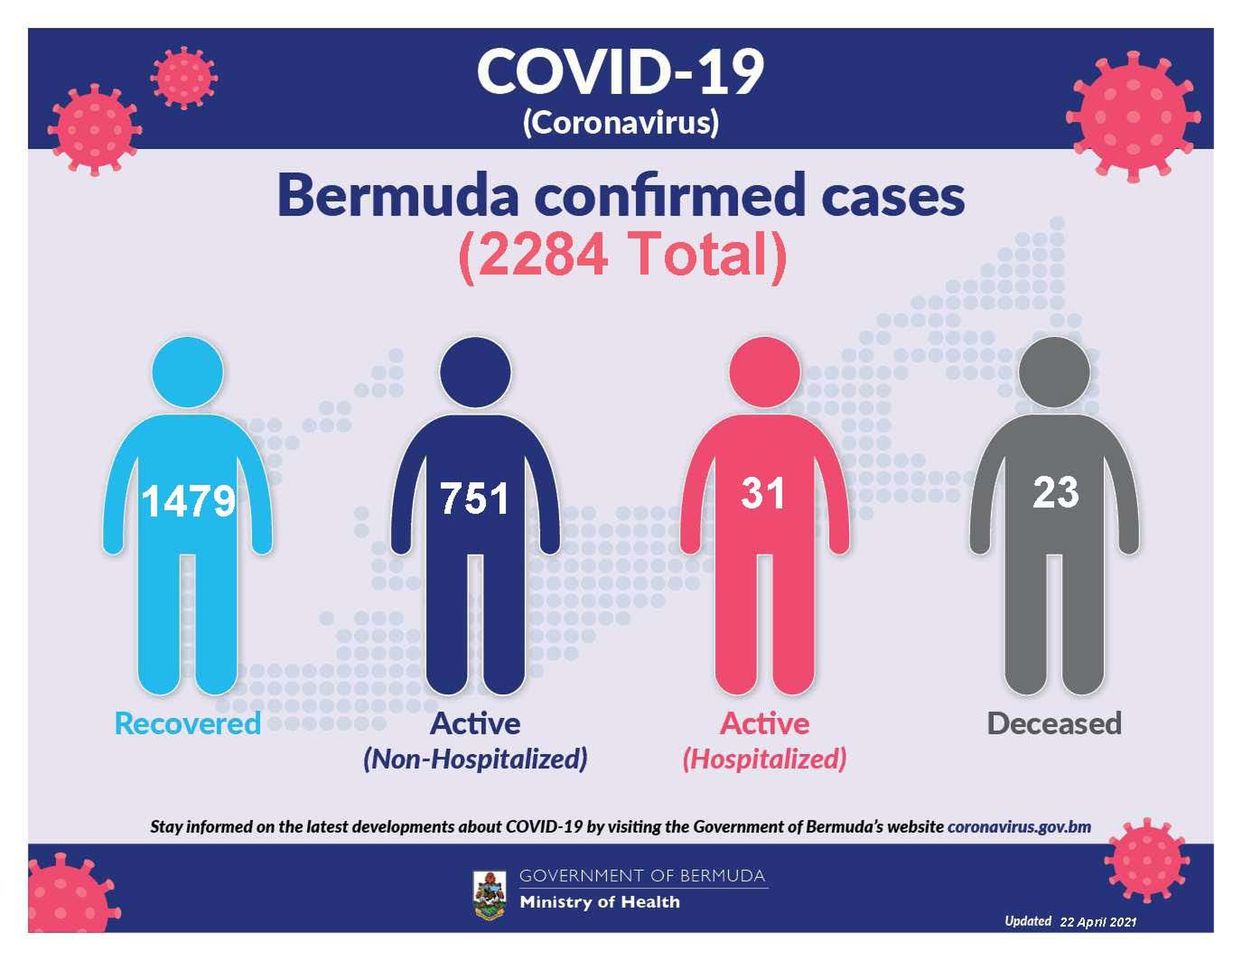 23 new COVID-19 cases and 1 death reported in Bermuda, April 22